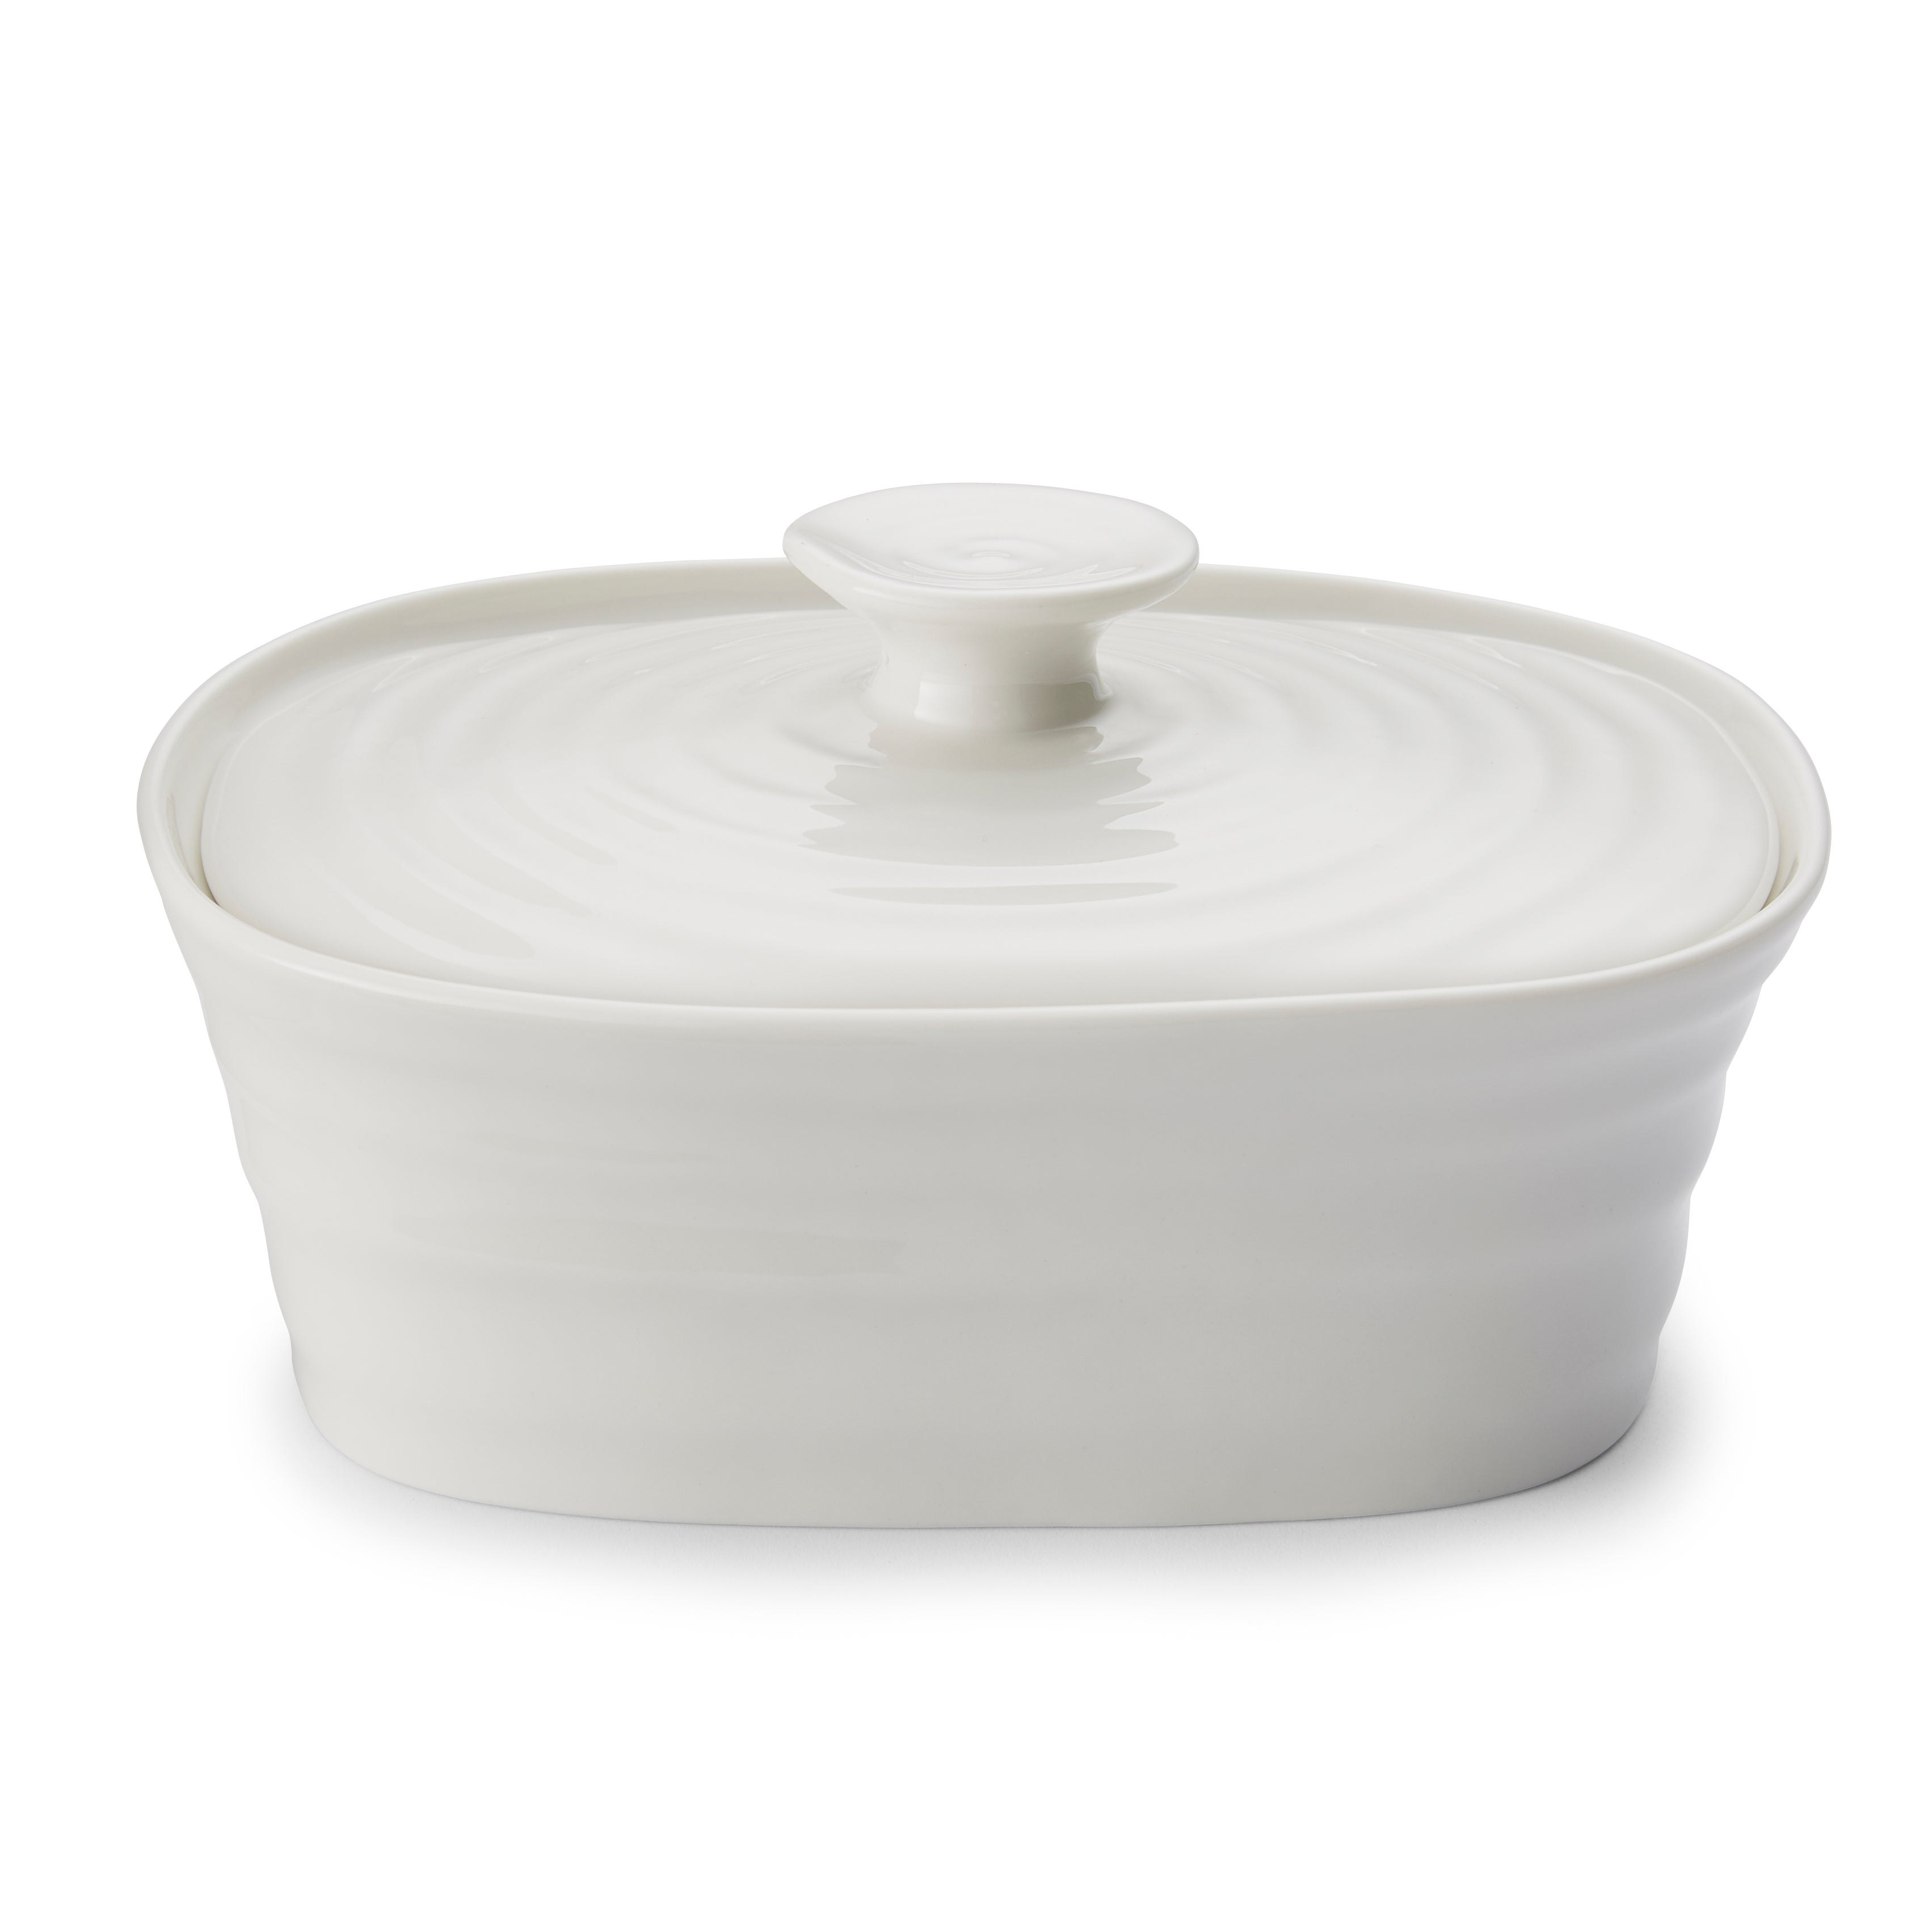 Sophie Conran for Portmeirion Butter Dish